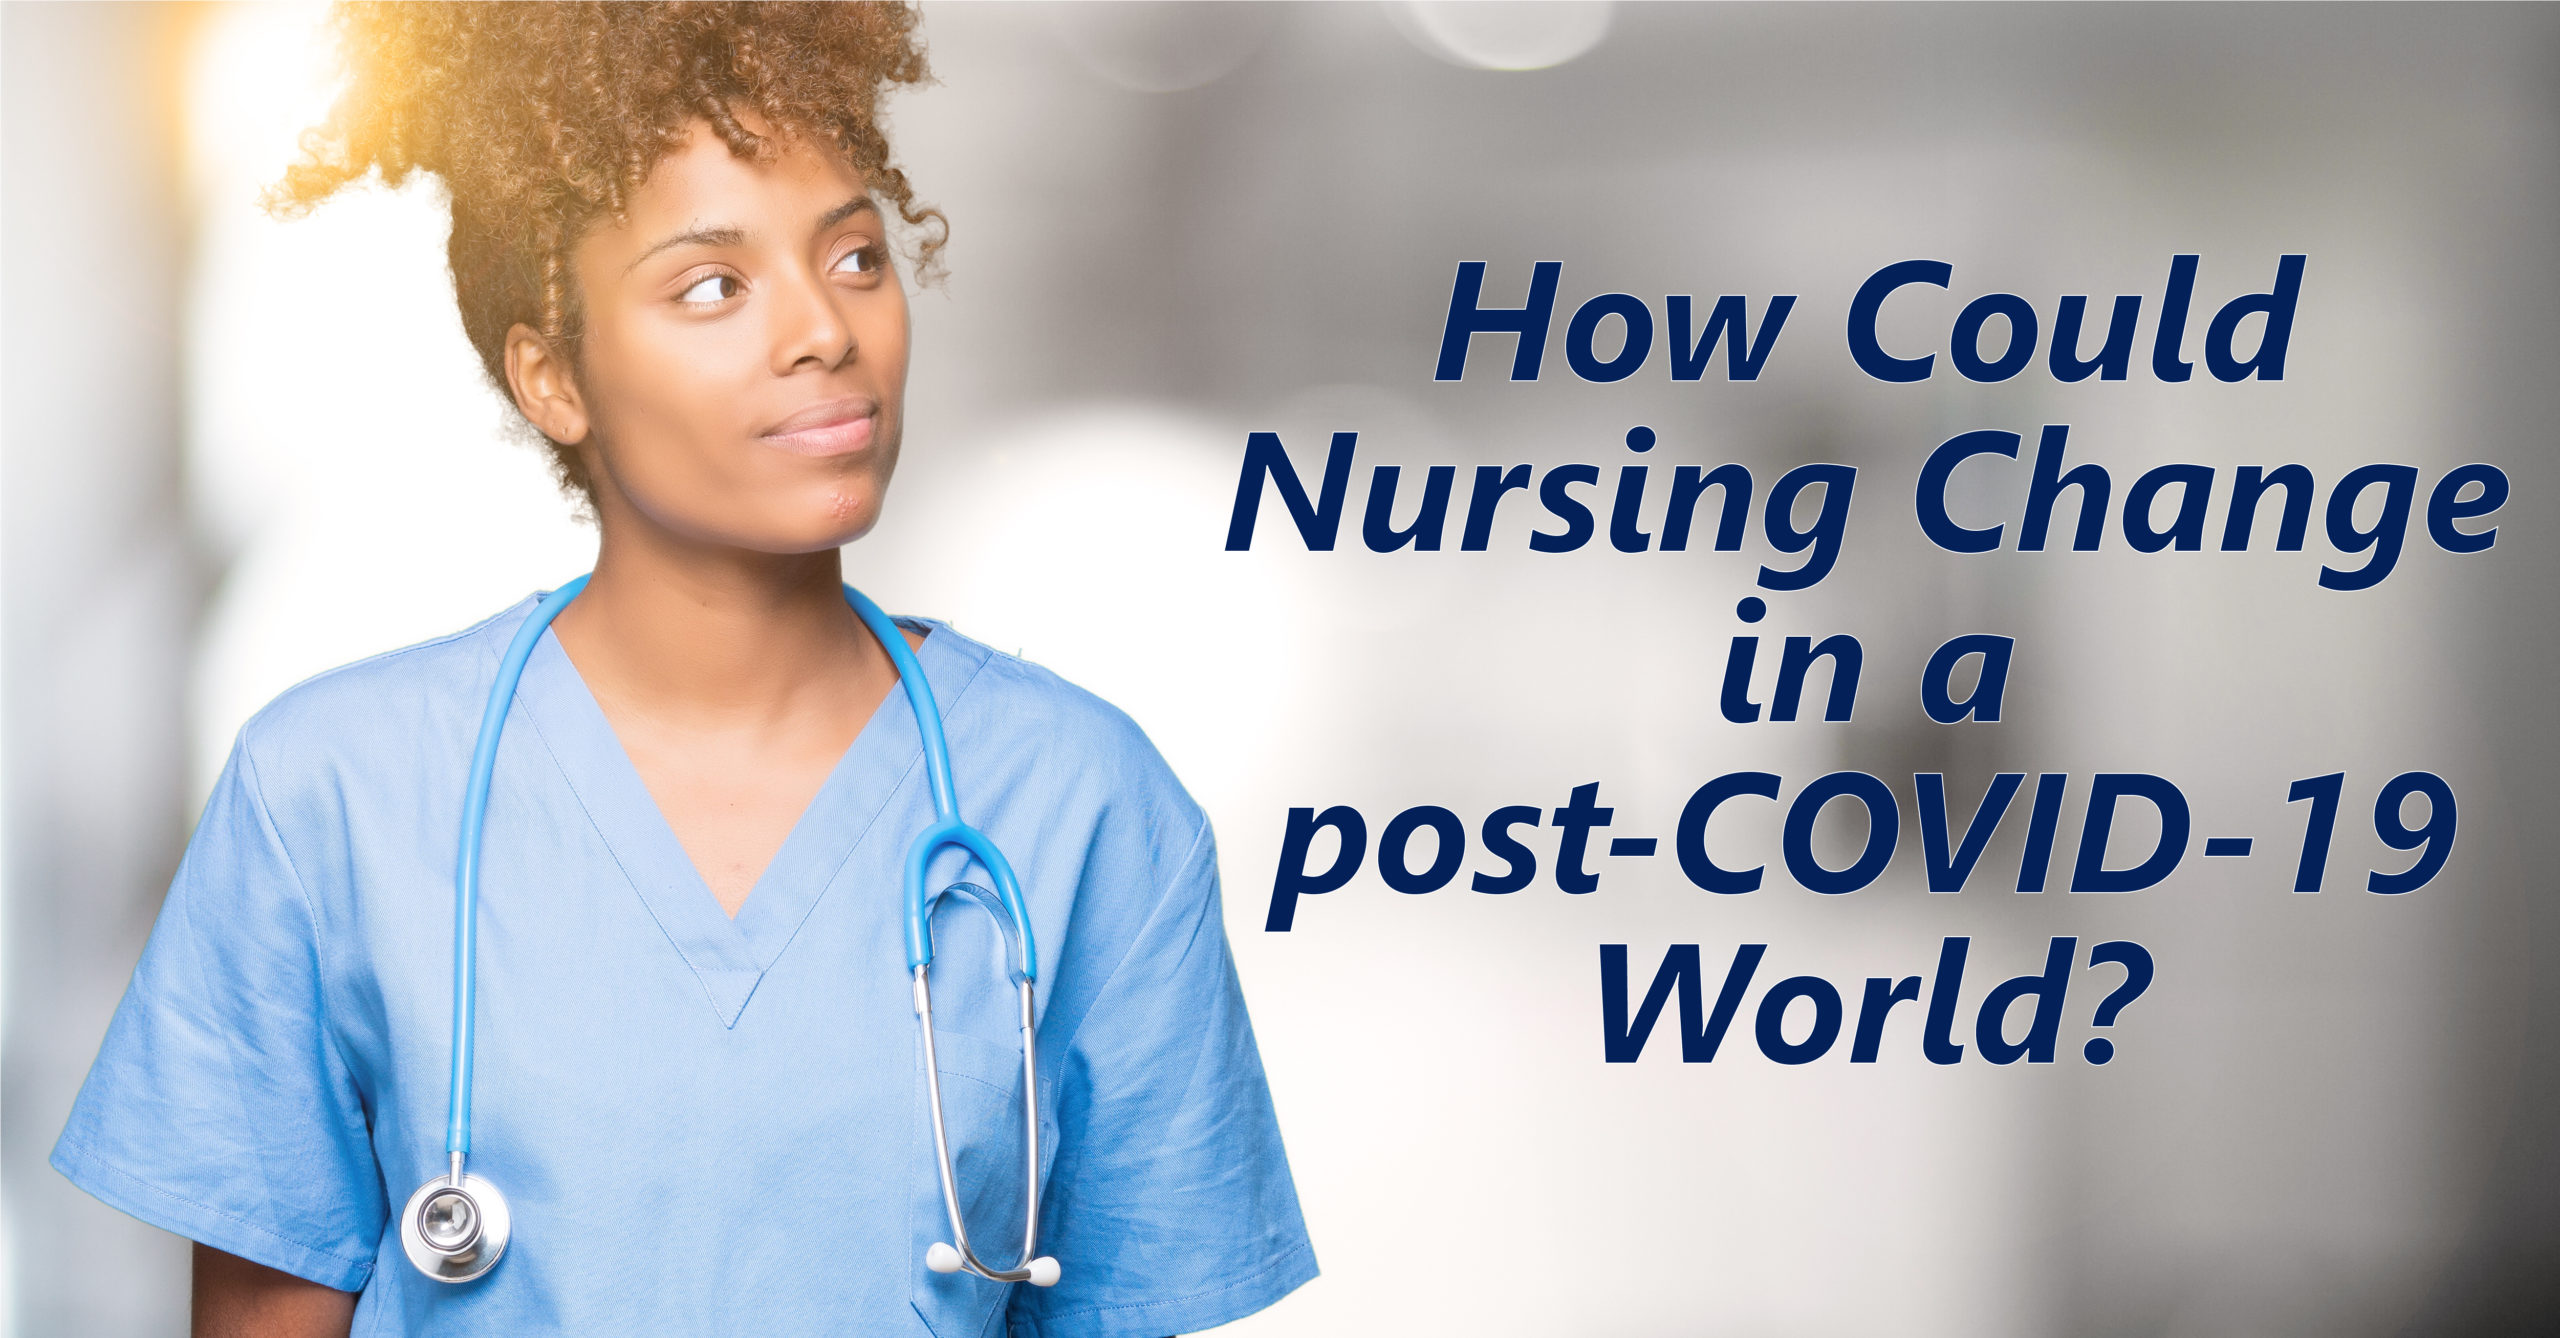 How Could Nursing Change in a post-COVID-19 World?